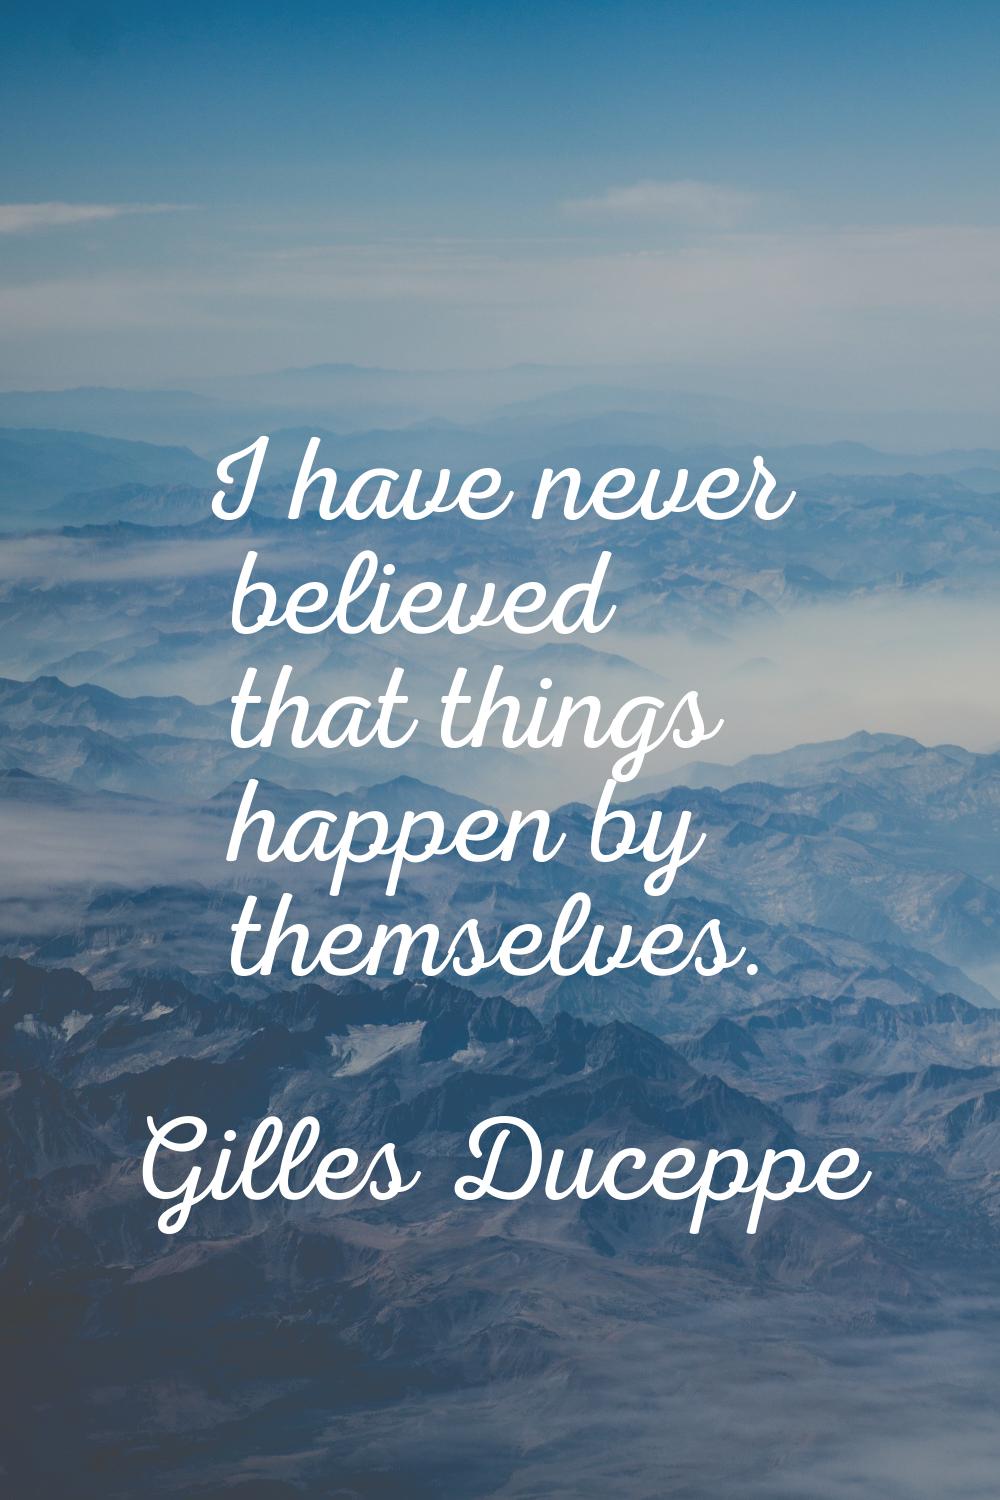 I have never believed that things happen by themselves.